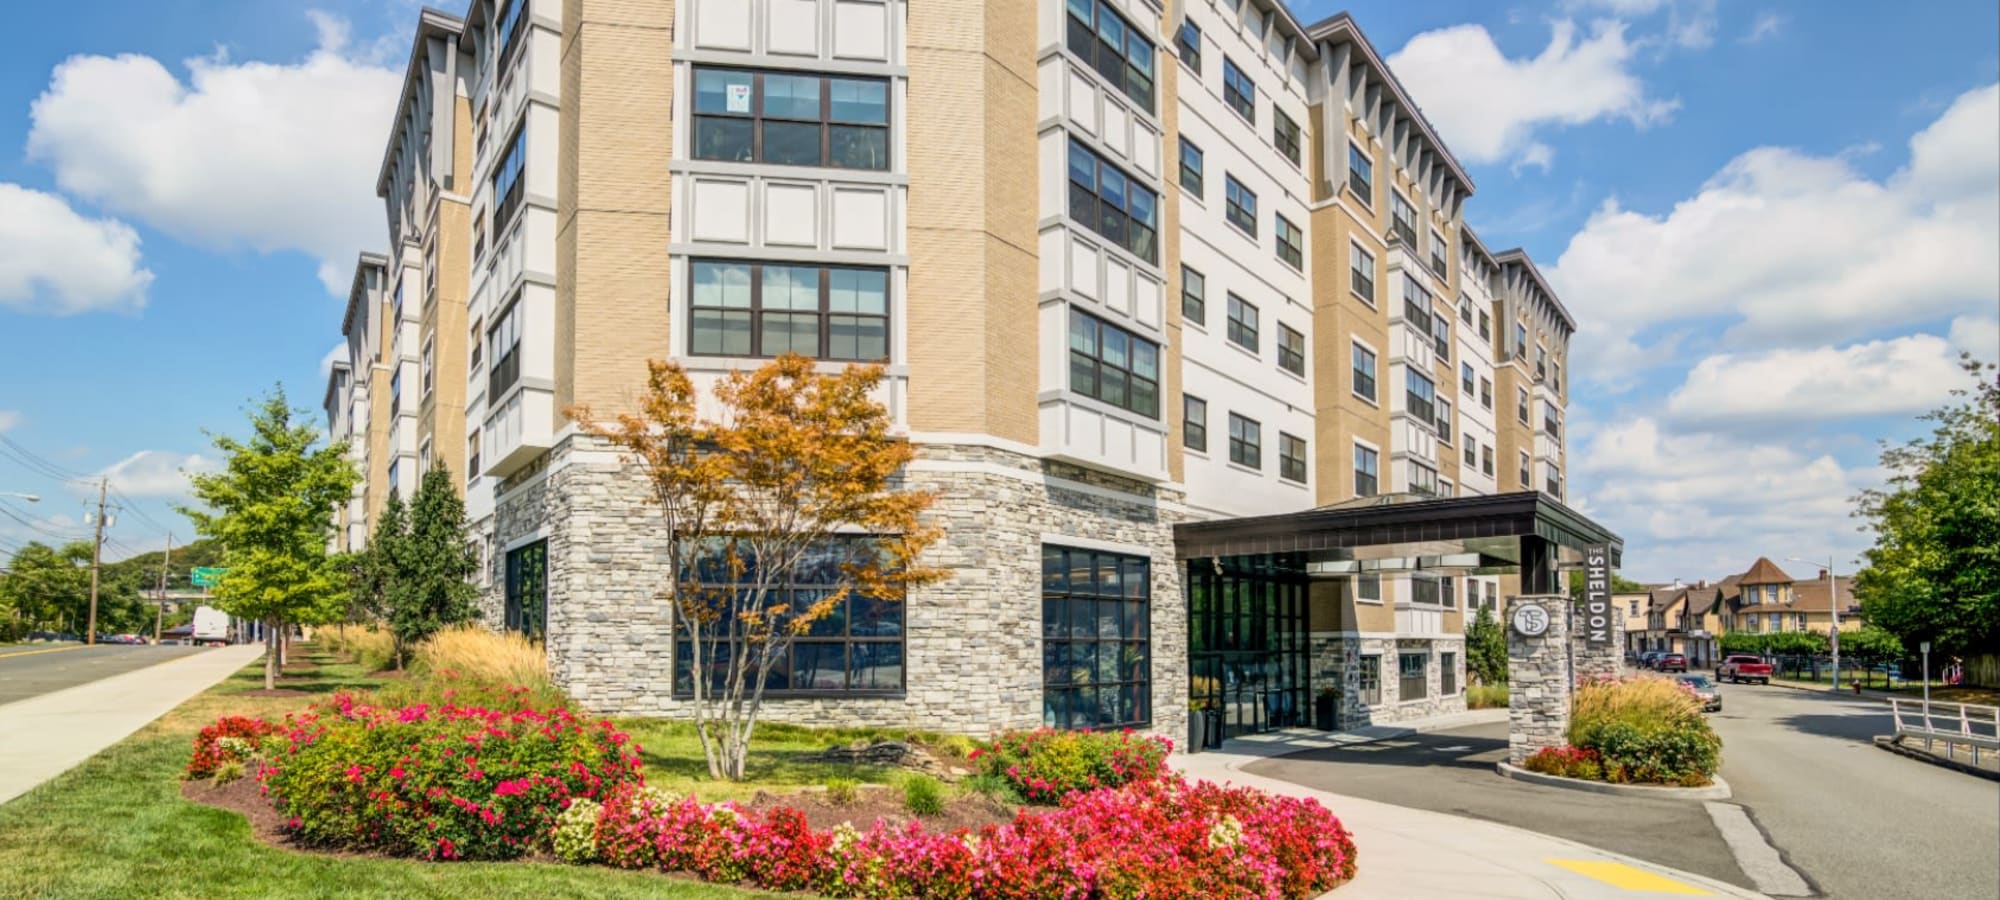 Apartments in Suffern New York